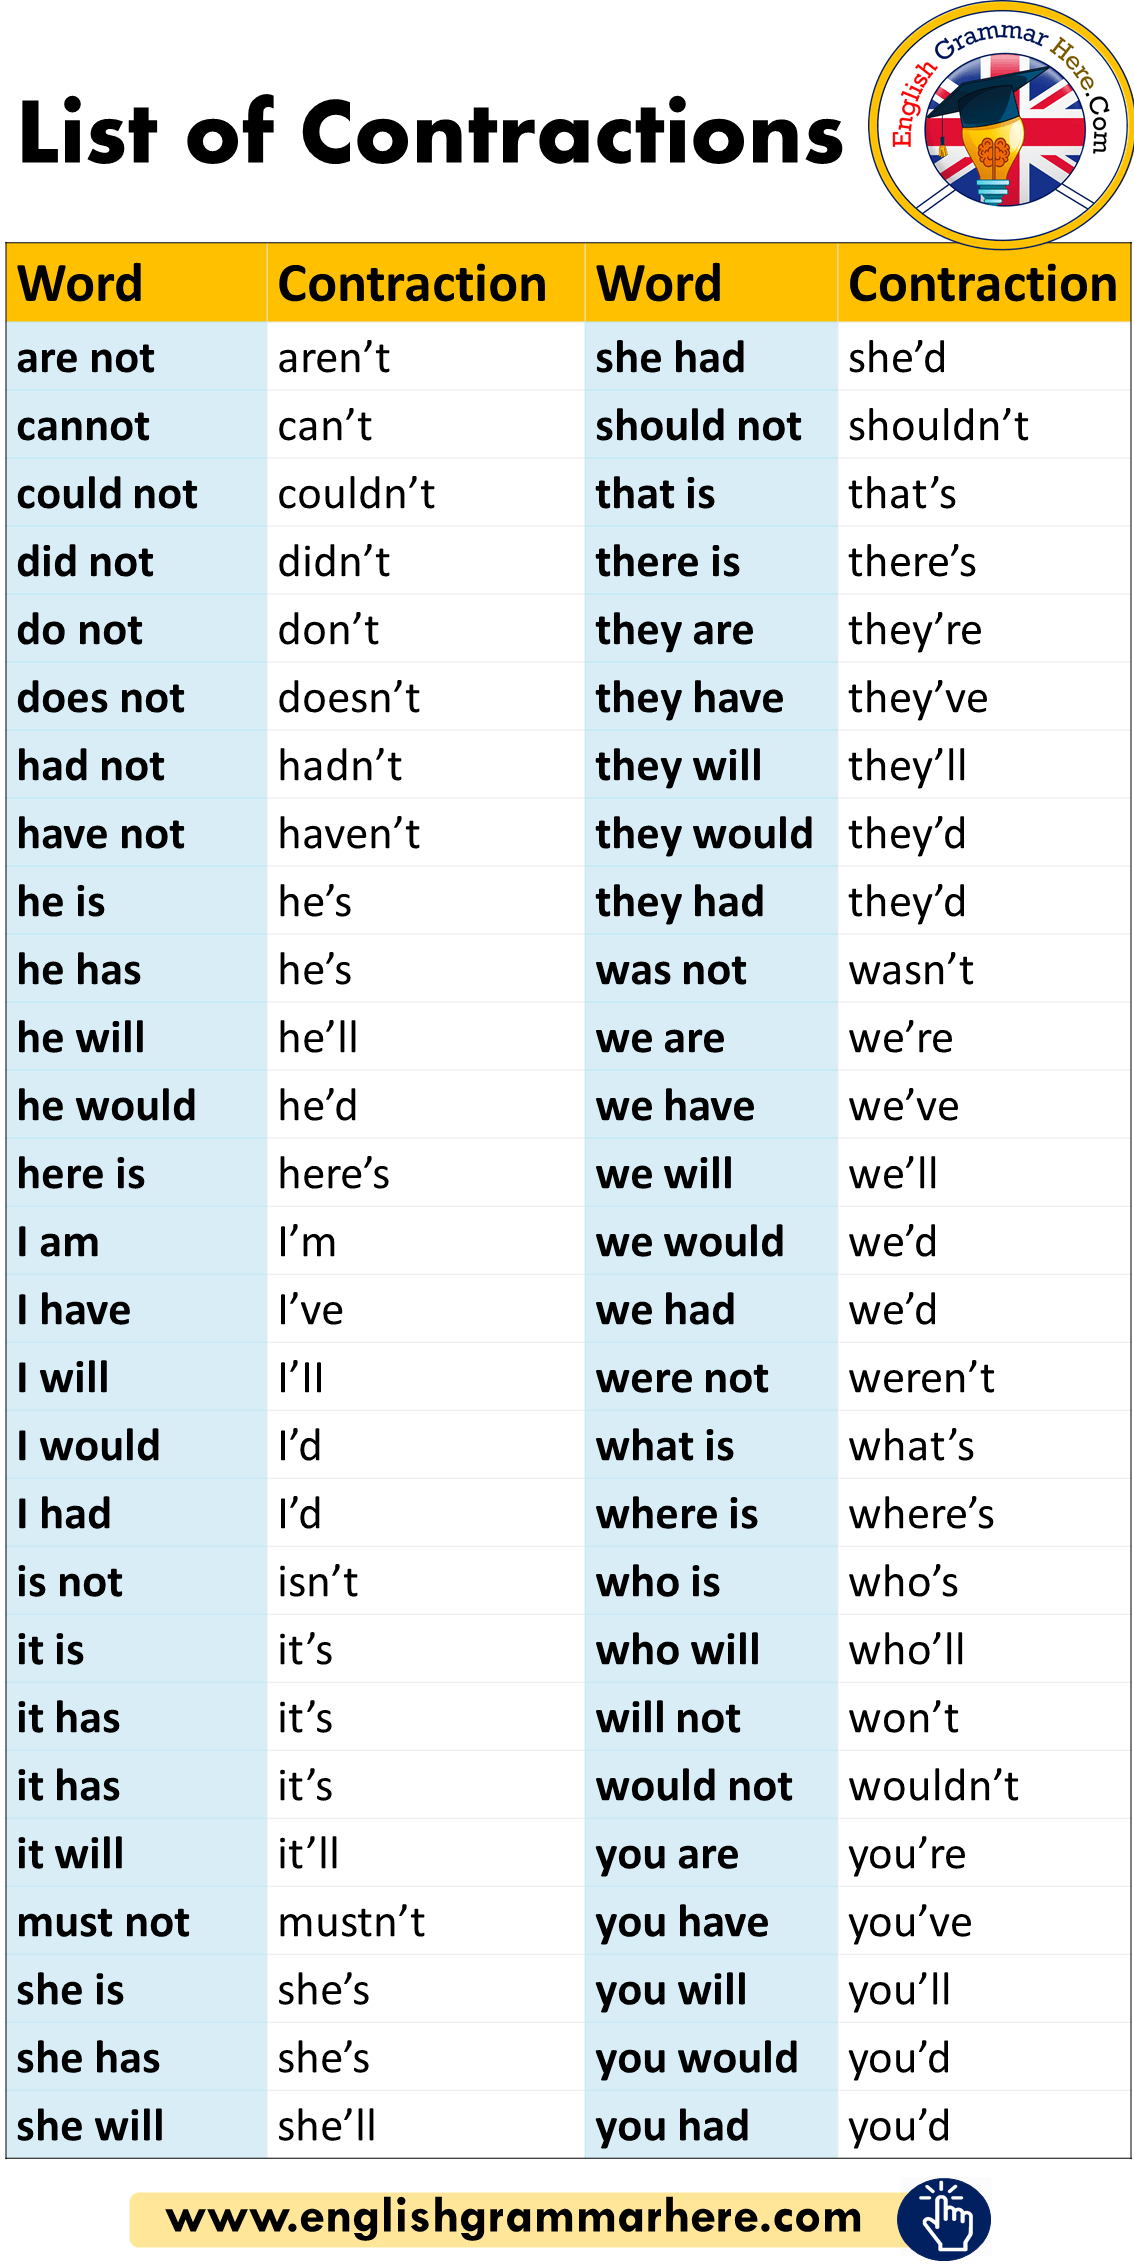 Detailed-List-of-Contractions-in-English.png